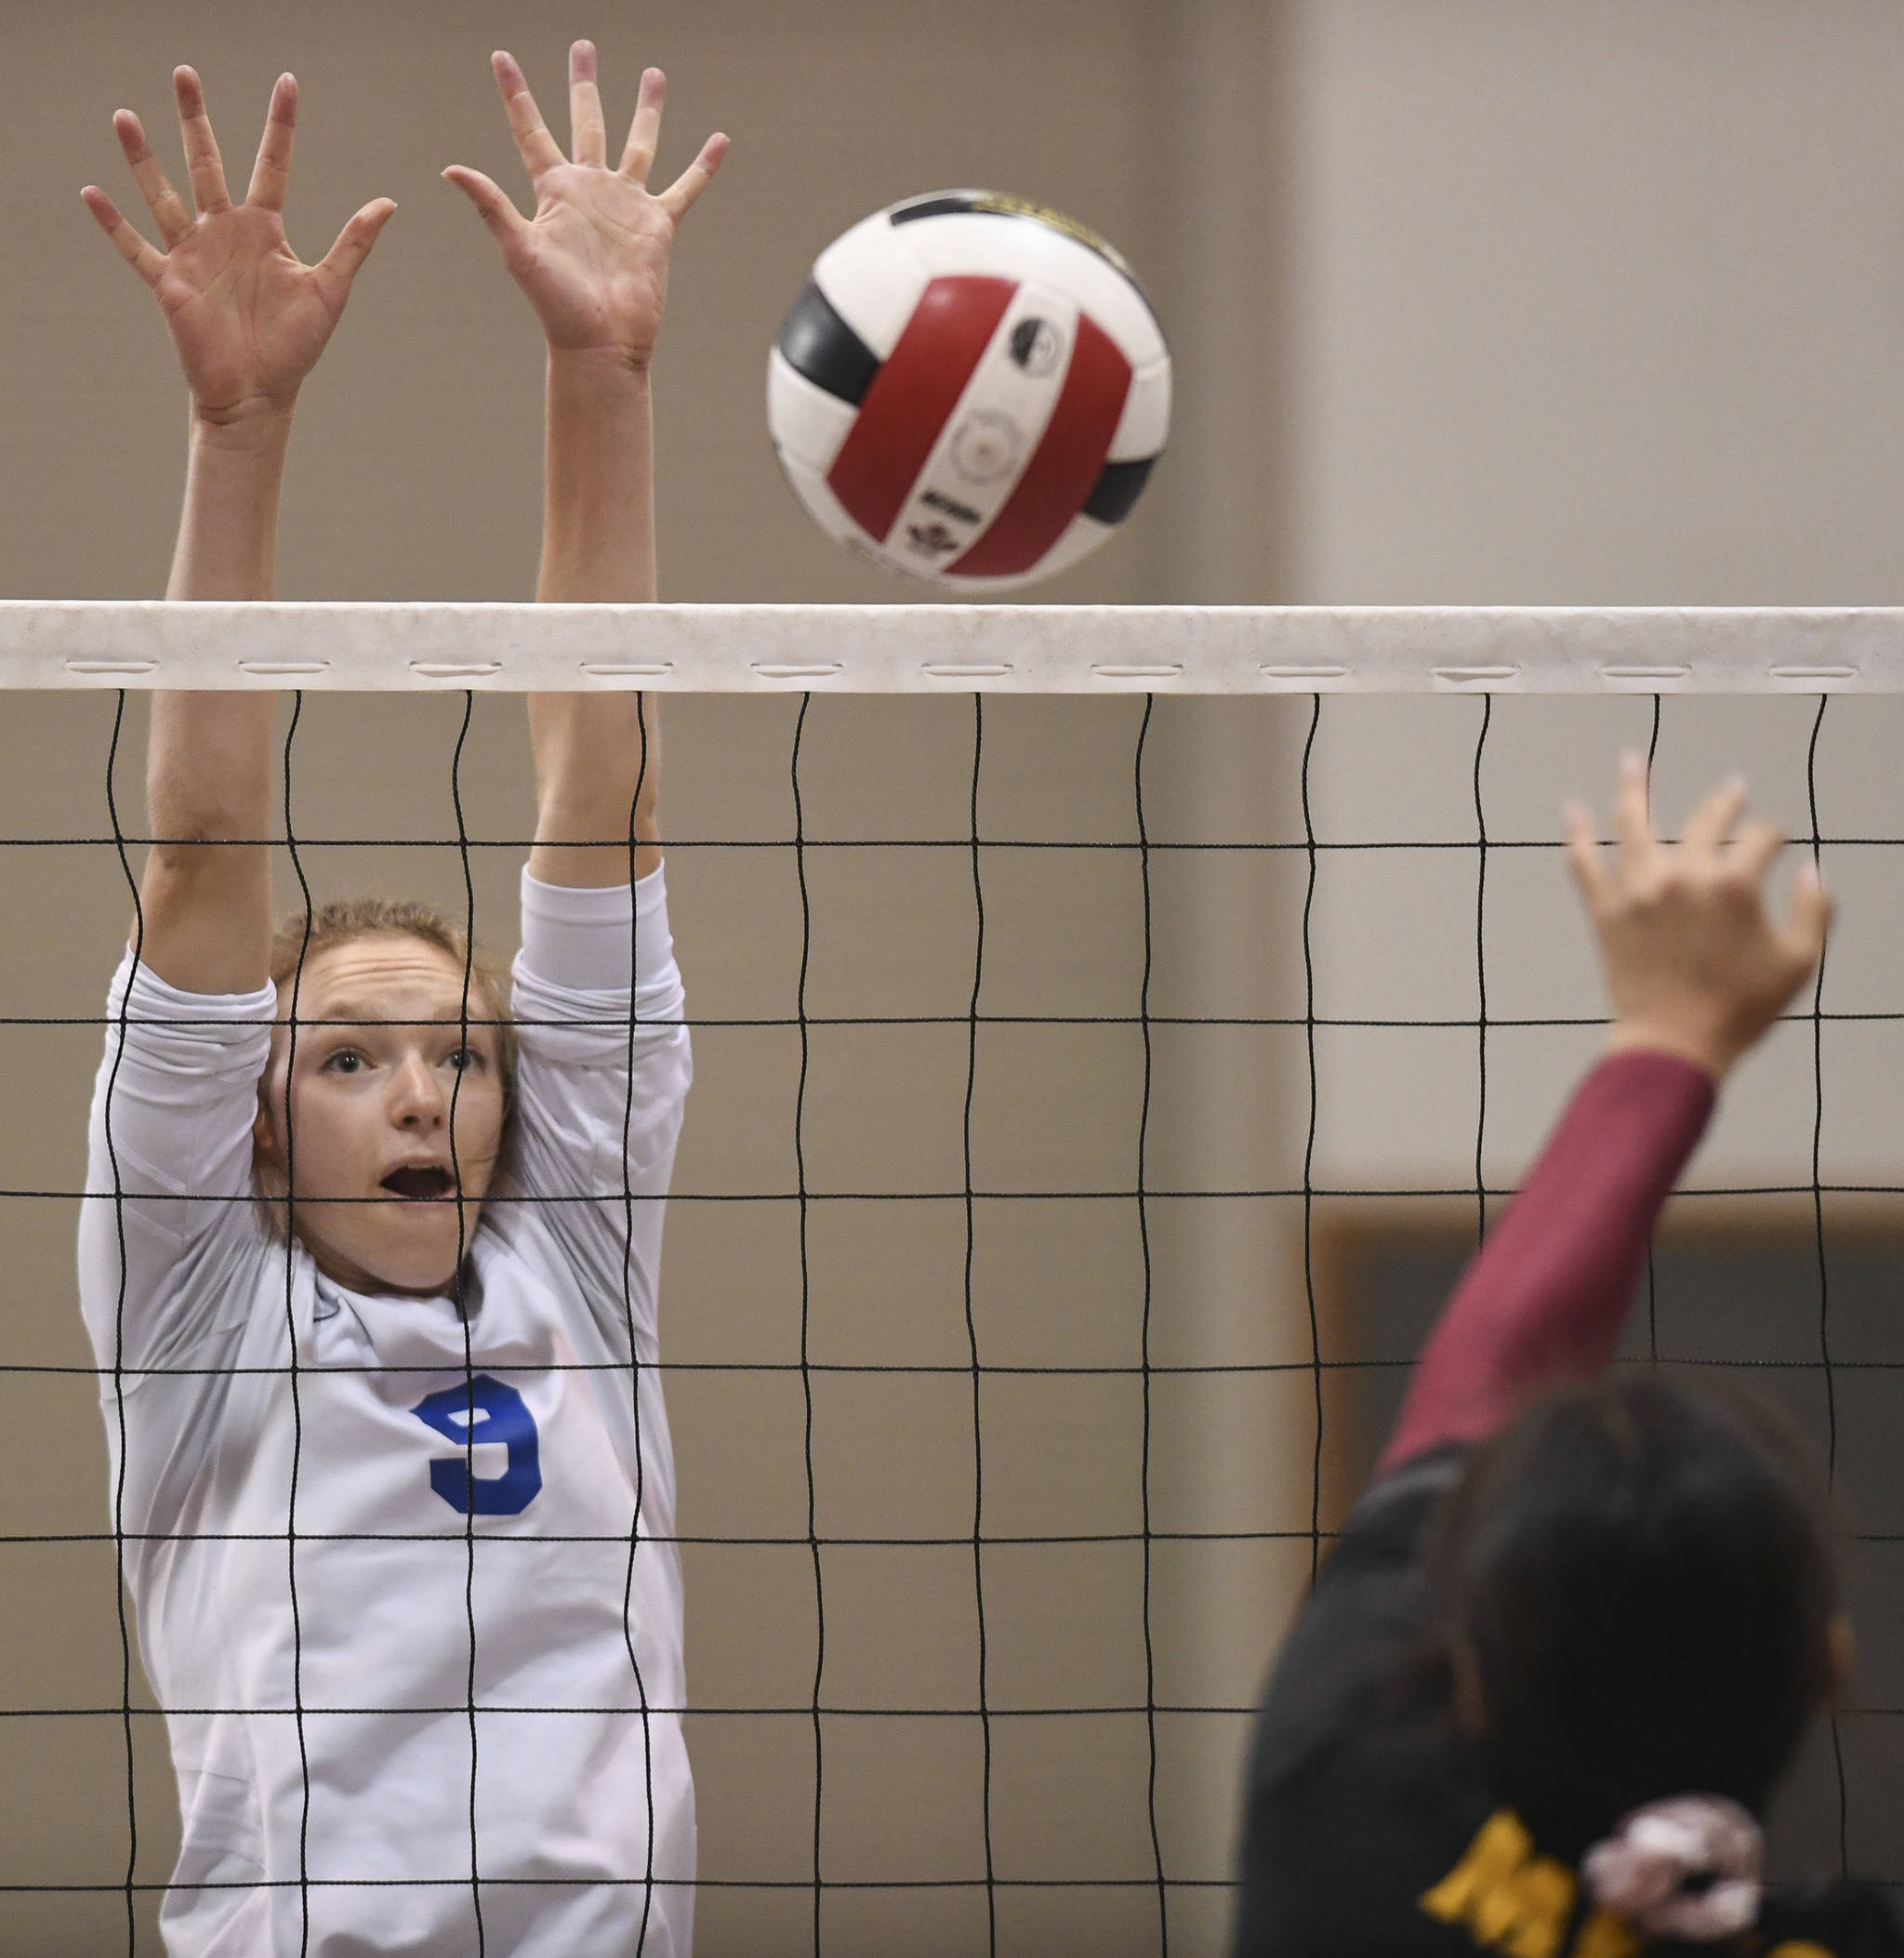 Thunder Mountain’s Sophie Harvey attempts a block against Mt. Edgecumbe at the Volleyball Jamboree at Juneau-Douglas High School: Yadaa.at Kalé on Friday, Aug. 30, 2019. (Michael Penn | Juneau Empire)